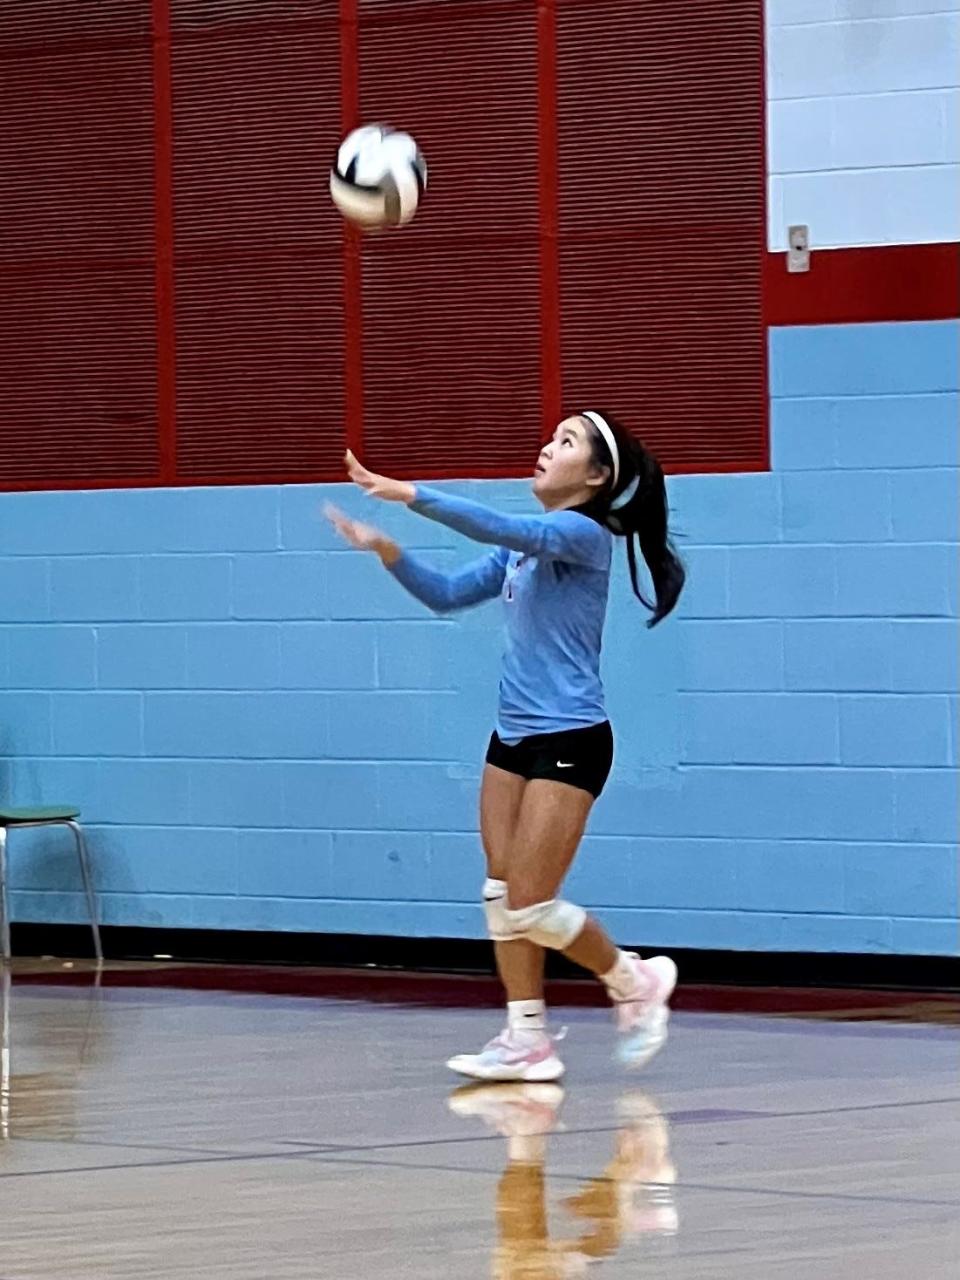 Ridgedale's Hannah Cook serves the volleyball during a home match with Elgin last year.